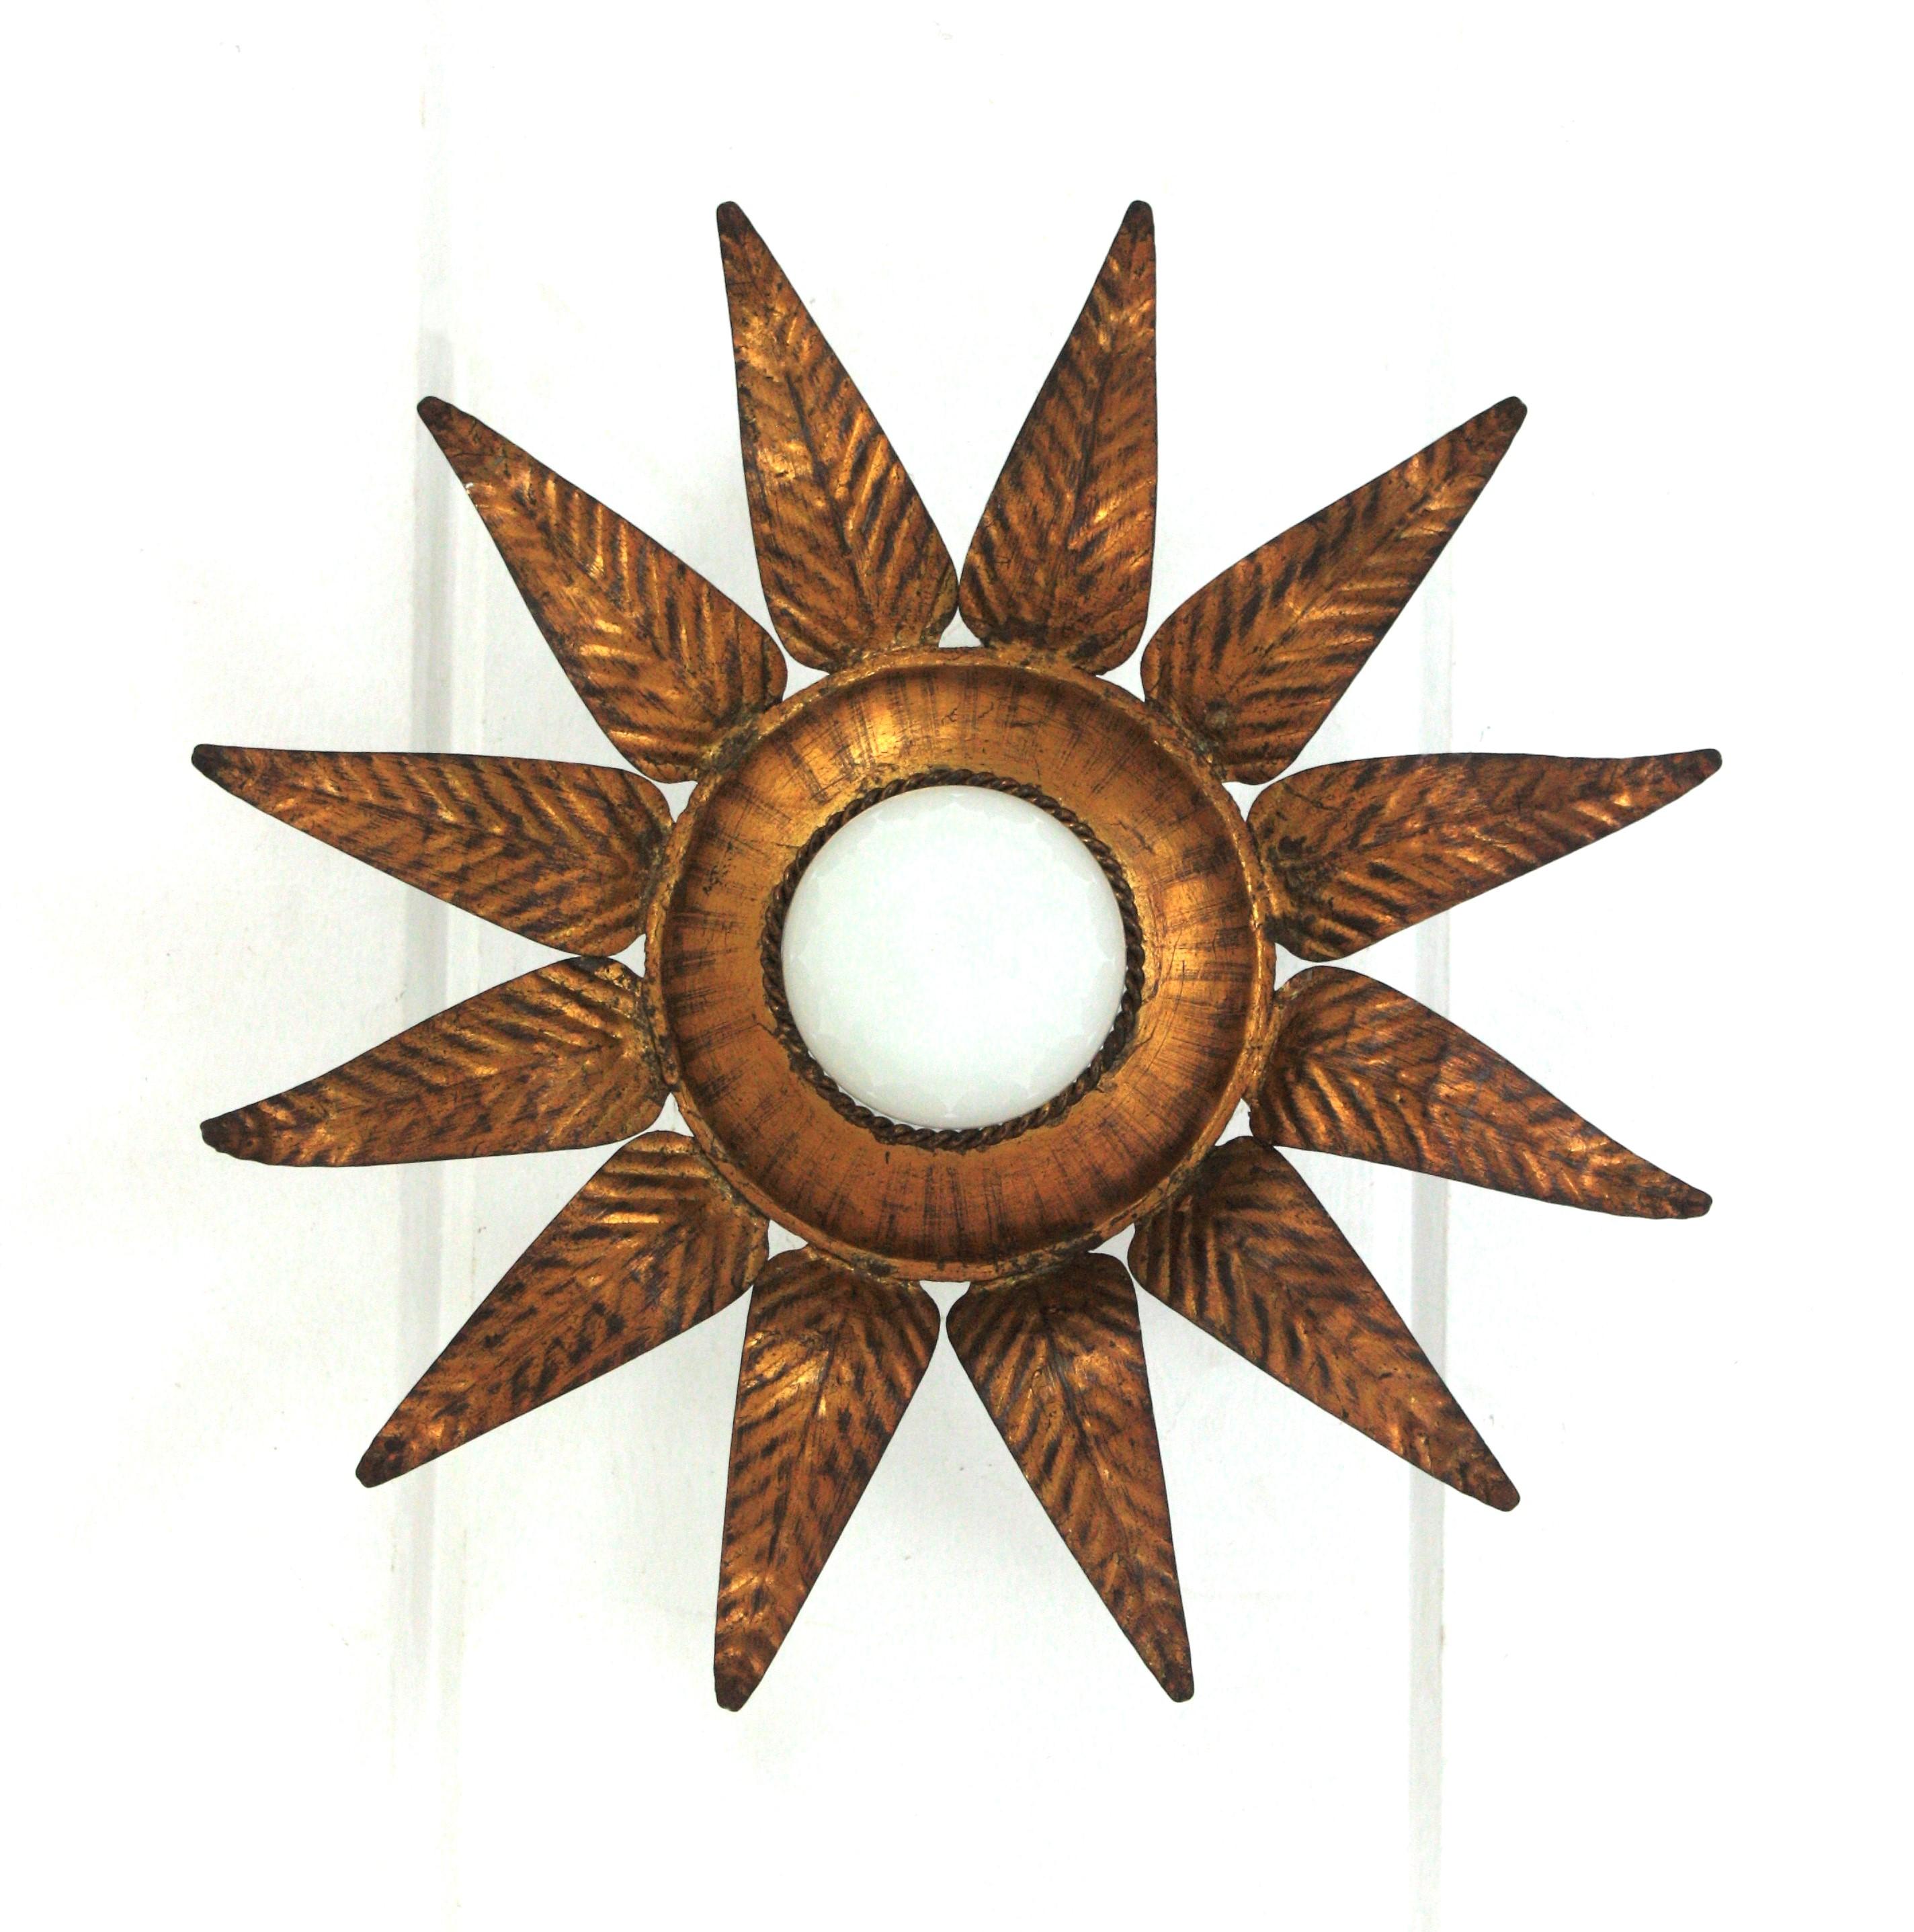 Flower Leafed Sunburst Flush Mount, Gilt Iron, Gold Leaf,  Spain, 1950s.
This ceiling light features a flower shaped frame with a layer of  leaves in surrounding a central exposed bulb. Each leaf has a detailed pressed work.
Original gilding in gold